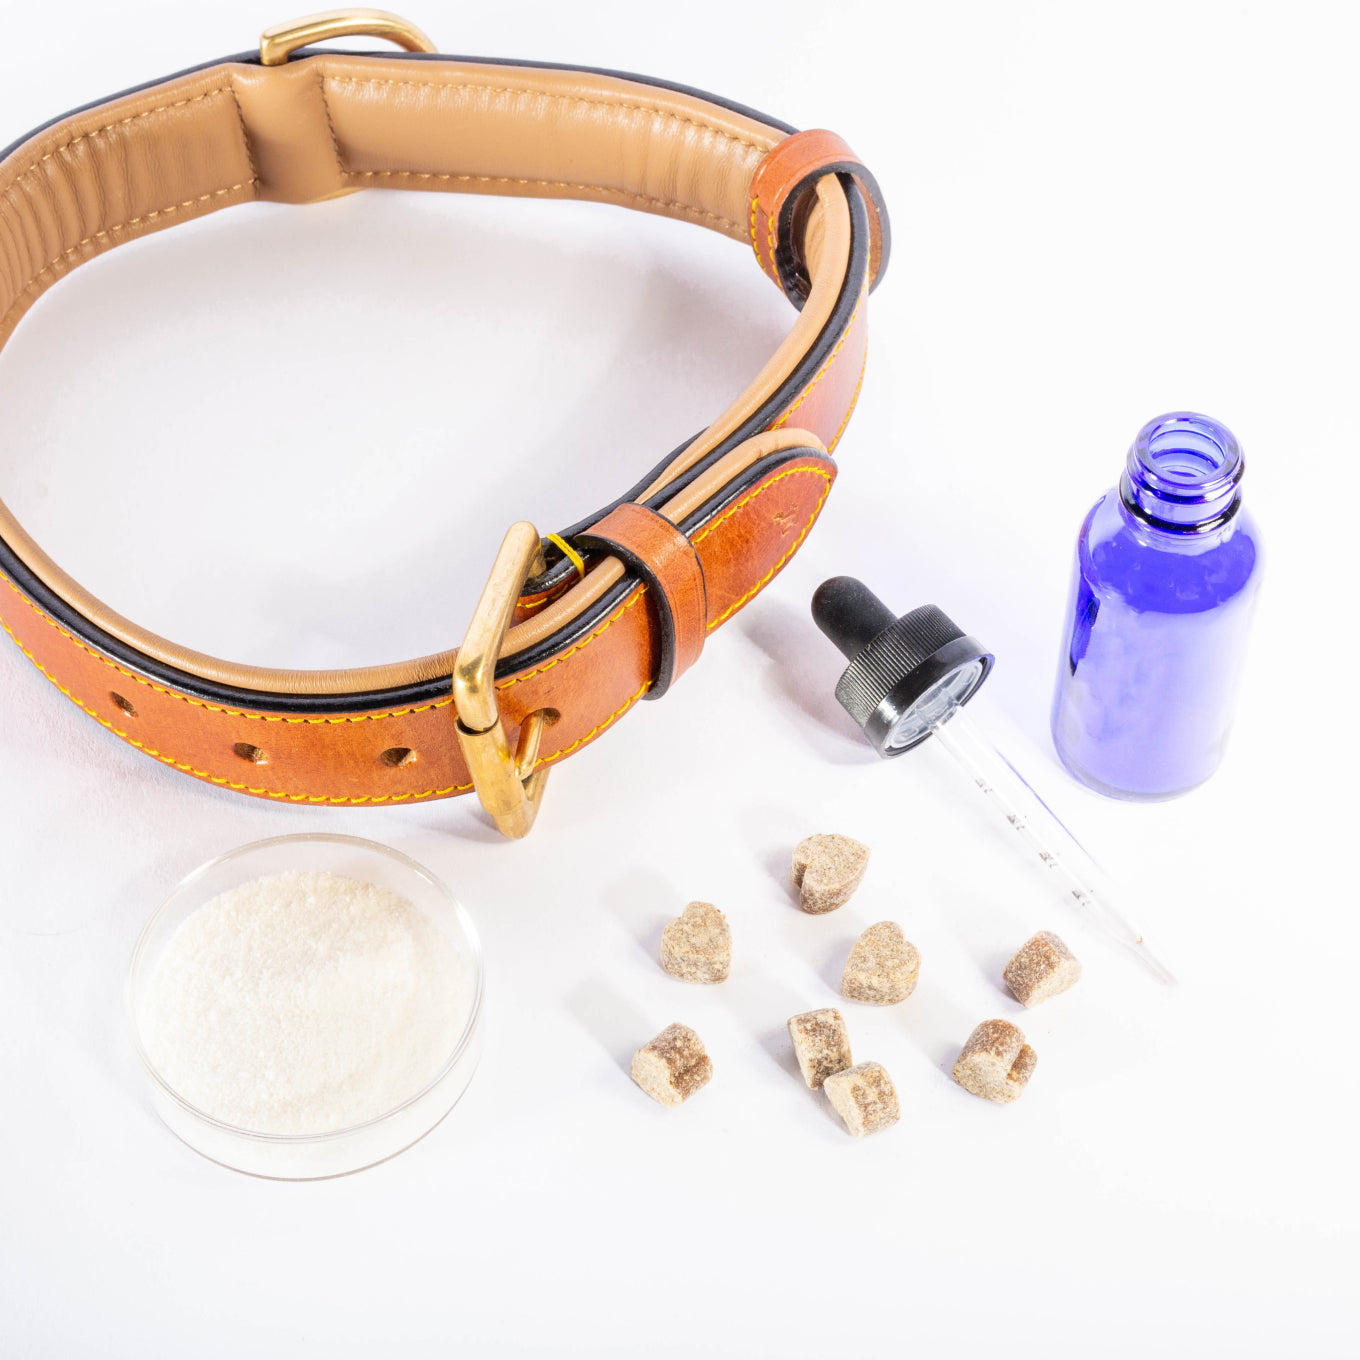 Pet collar, vial and dropper, pet treats, and petri dish of white powder on a white table